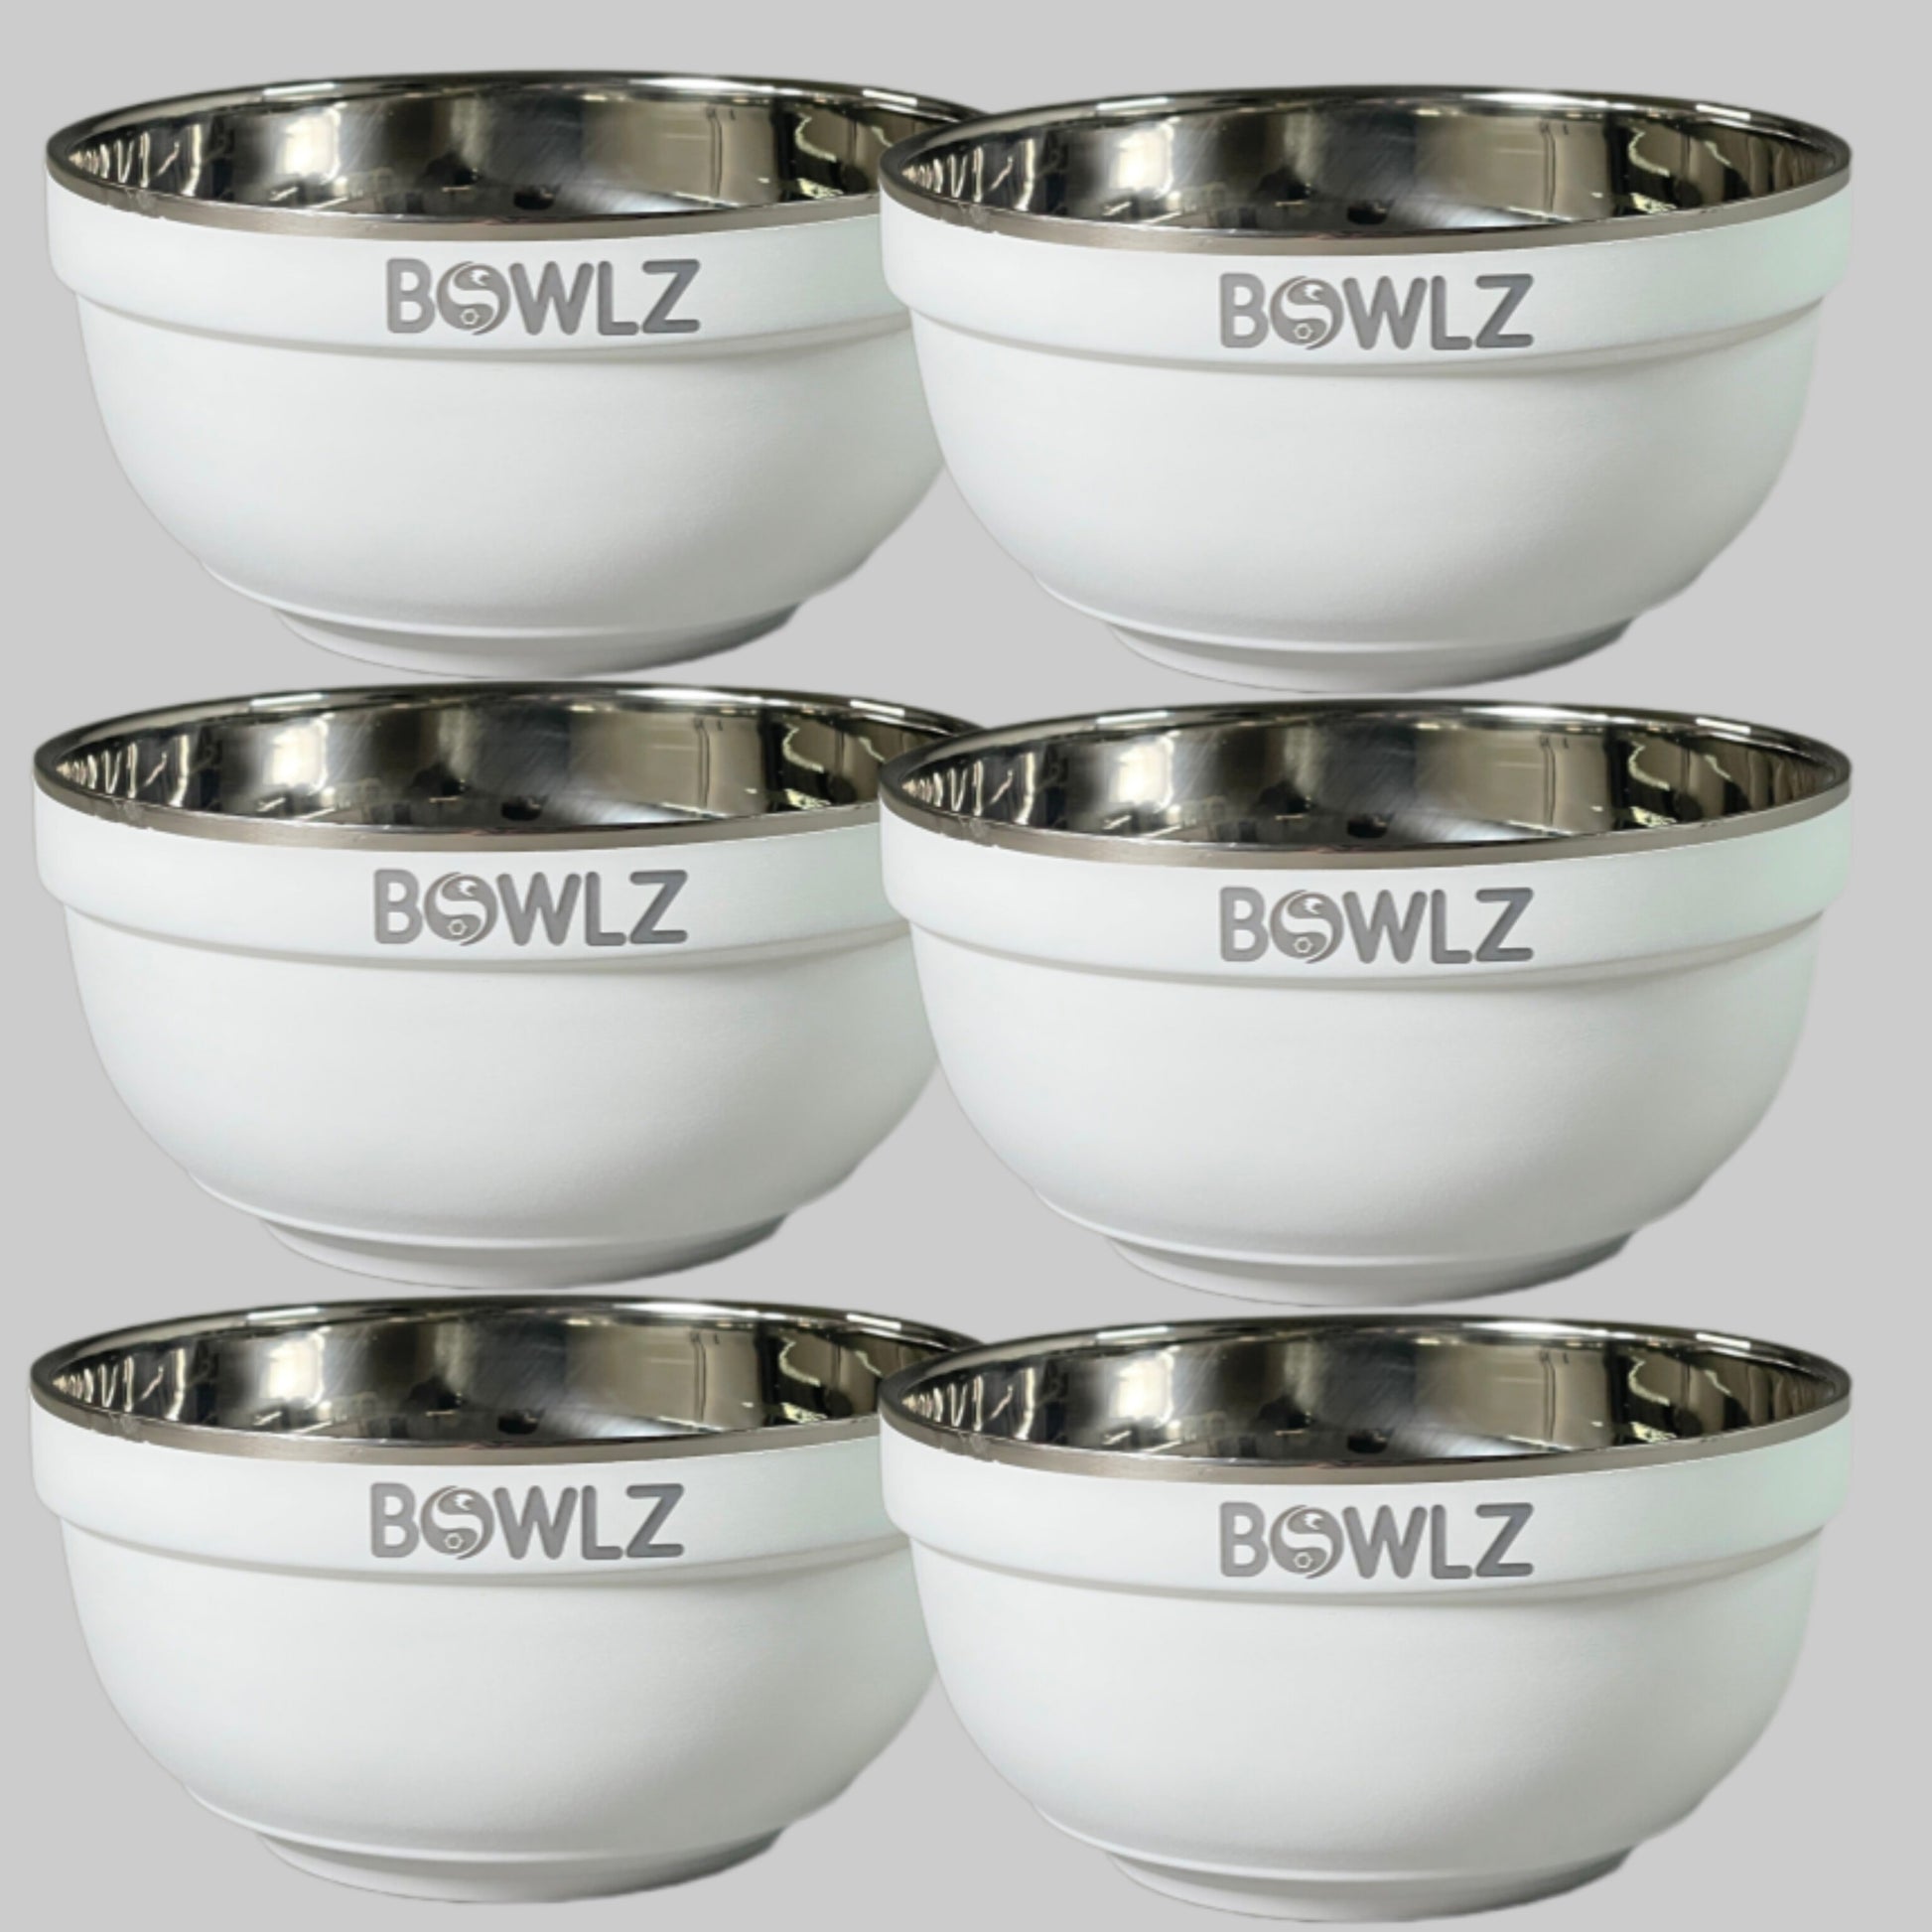 BOWLZ Stainless Steel Insulated Bowl 16 oz Ice Cream, Soup Mint